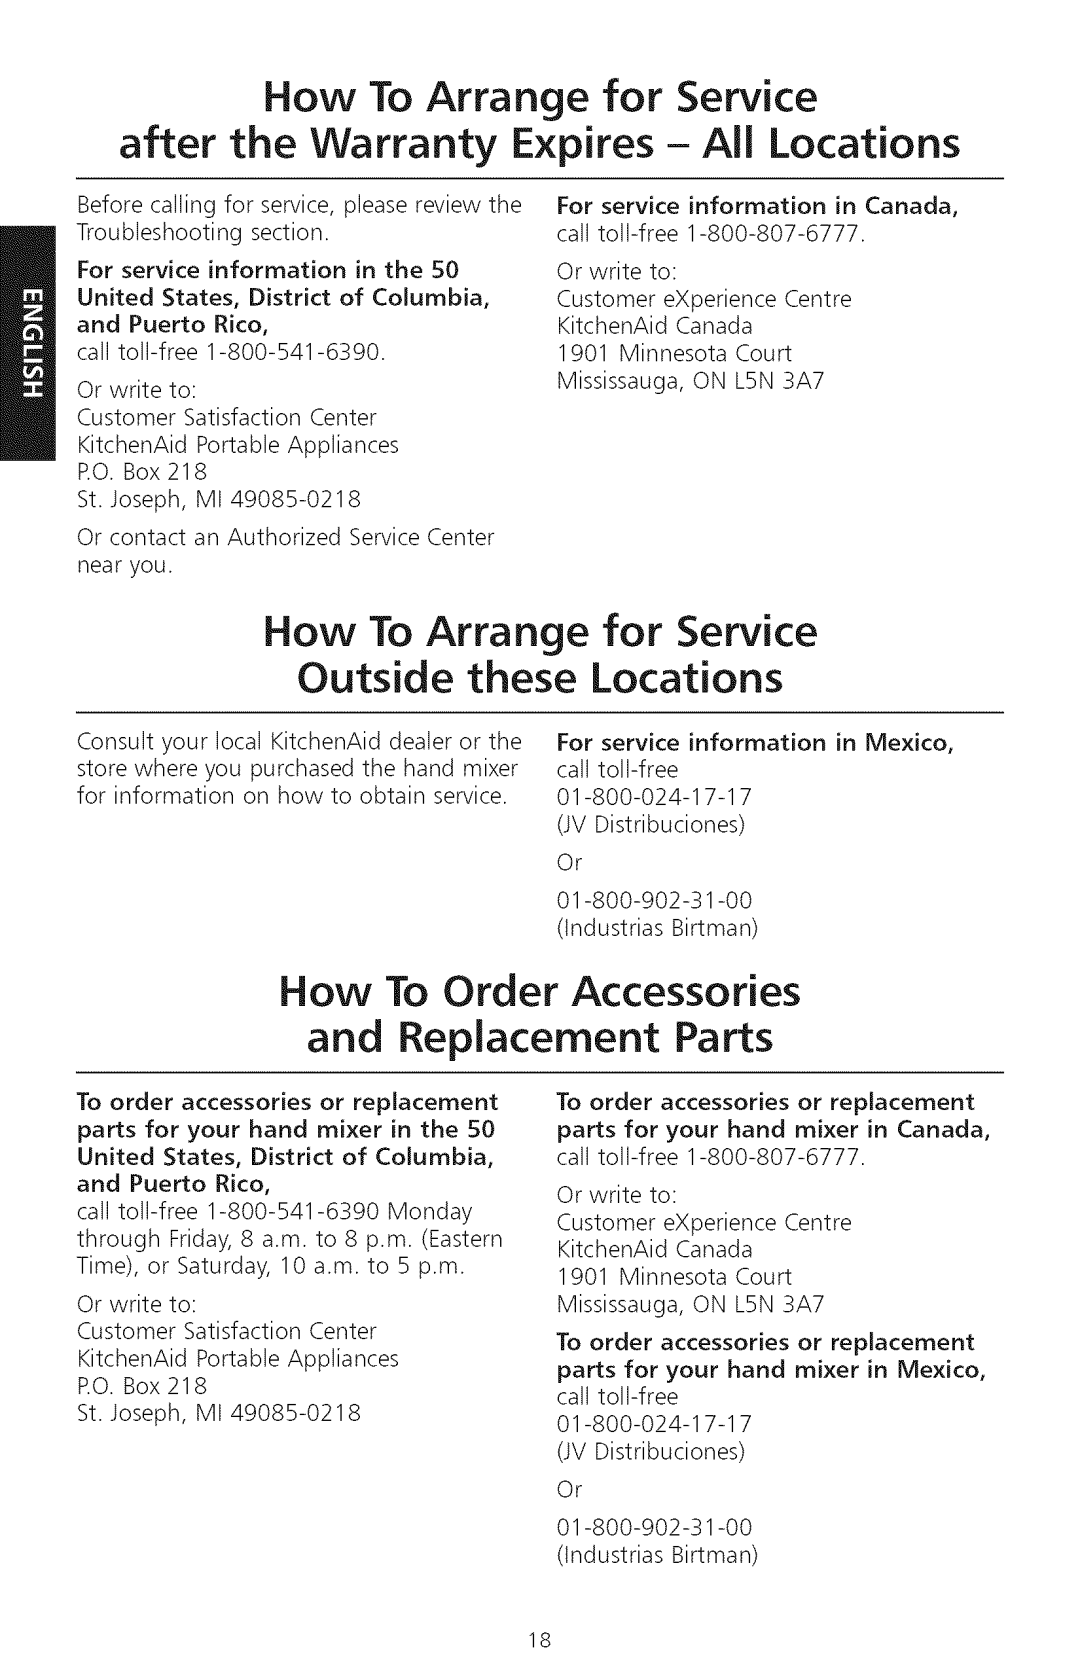 KitchenAid KHM920, KHM720 manual How To Arrange for Service after the Warranty Expires - All Locations 